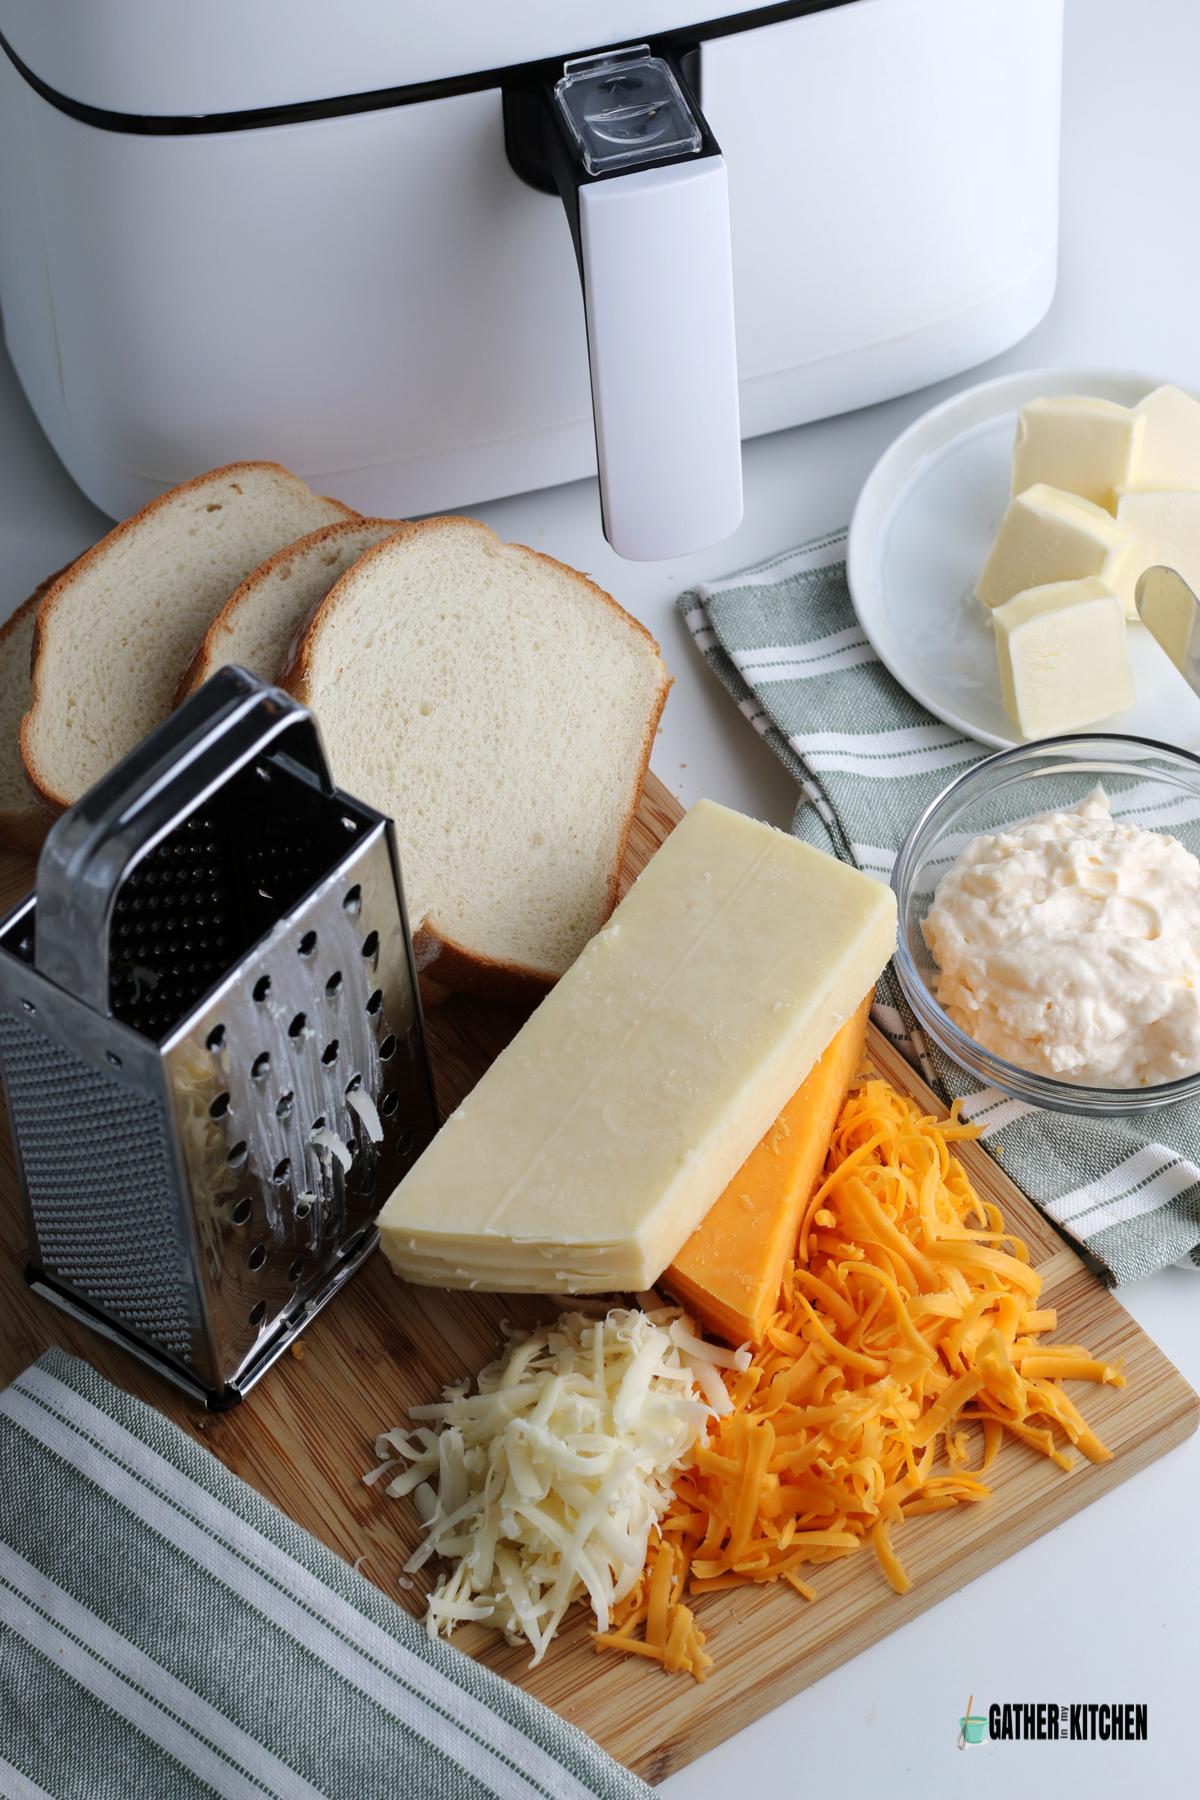 Air fryer, plate of butter, small bowl of mayonnaise, cheddar and monterey Jack cheese in block form plus a bit of shredded, cheese grater, and slices of sour dough bread.